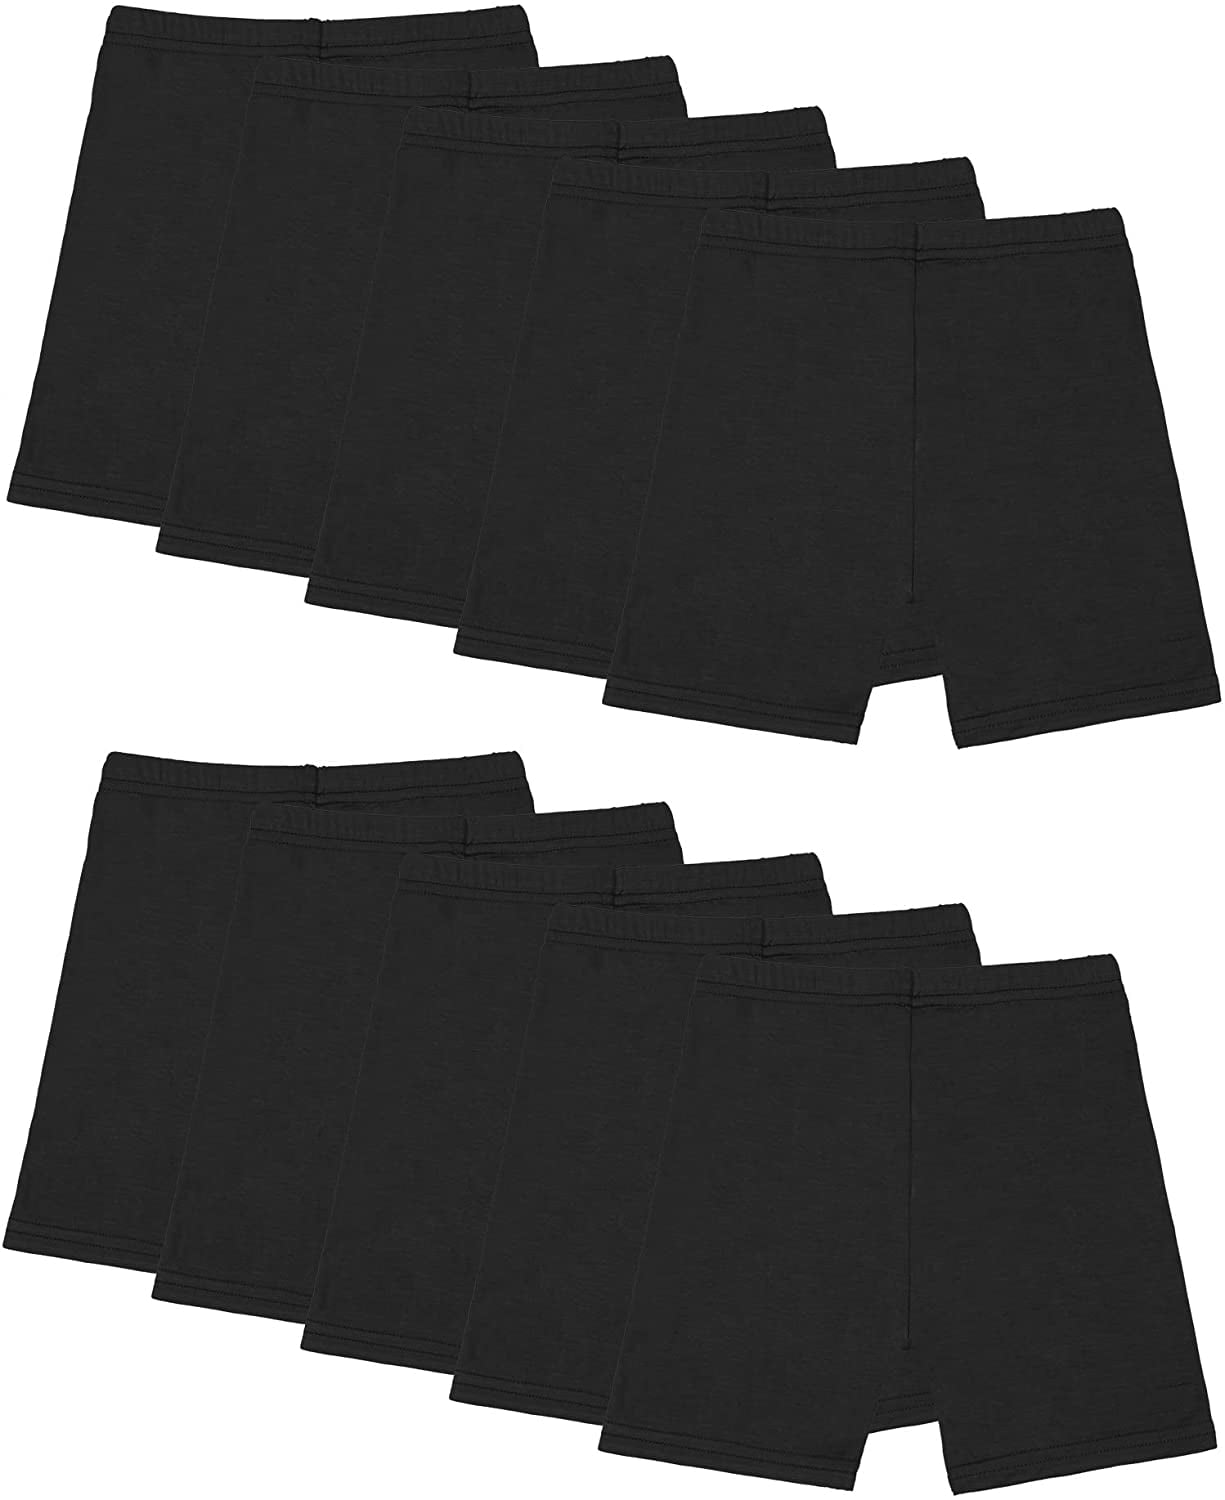 Resinta 12 Pack Dance Shorts Girls Bike Short Breathable and Safety 